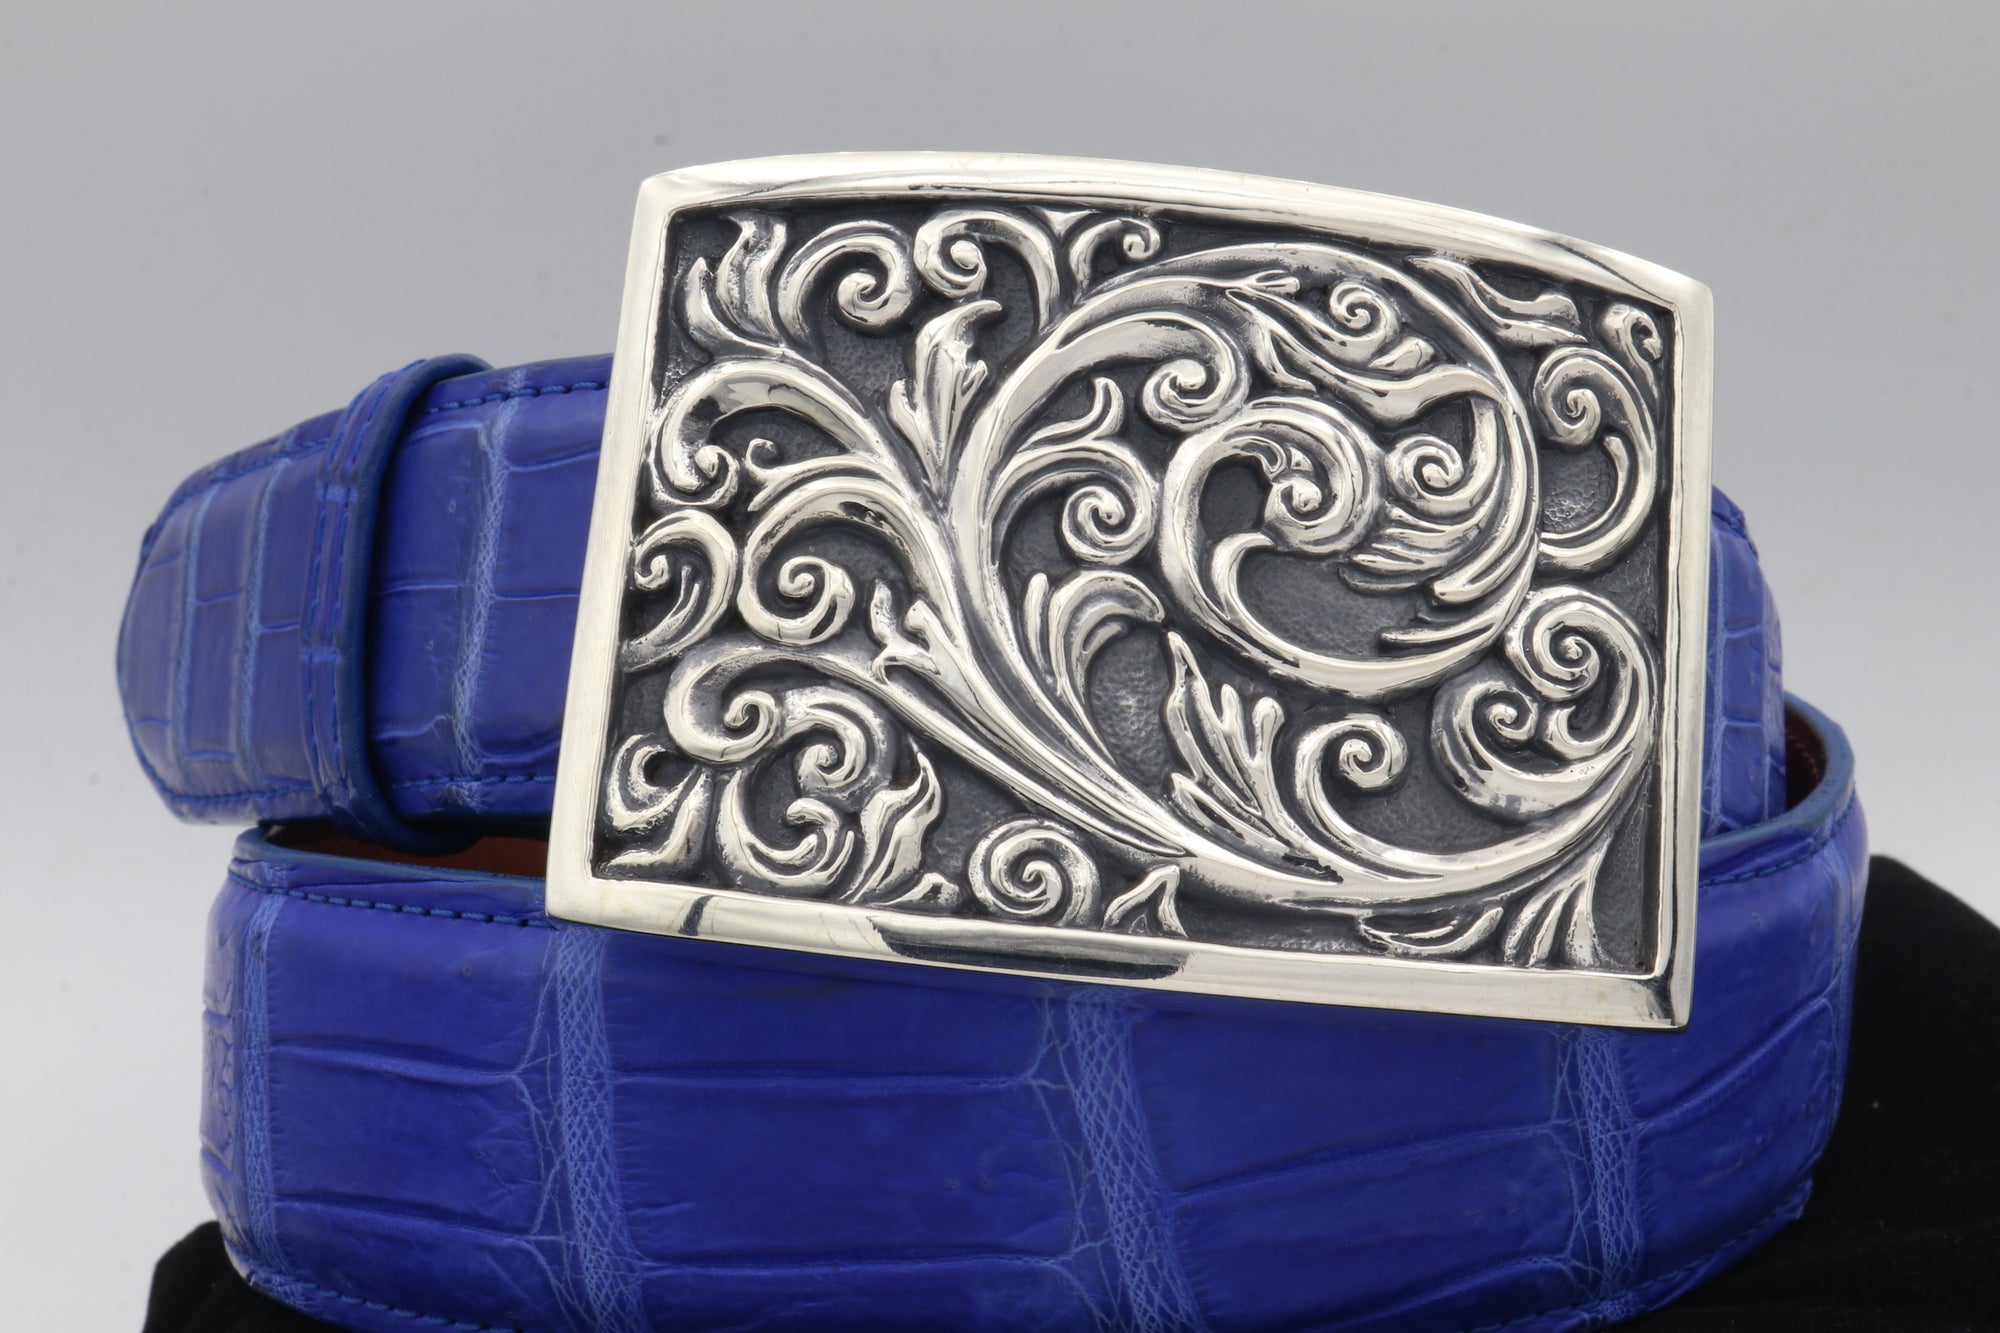 The Carved Scroll buckle,in sterling, is shown, front view on a black alligator belt.